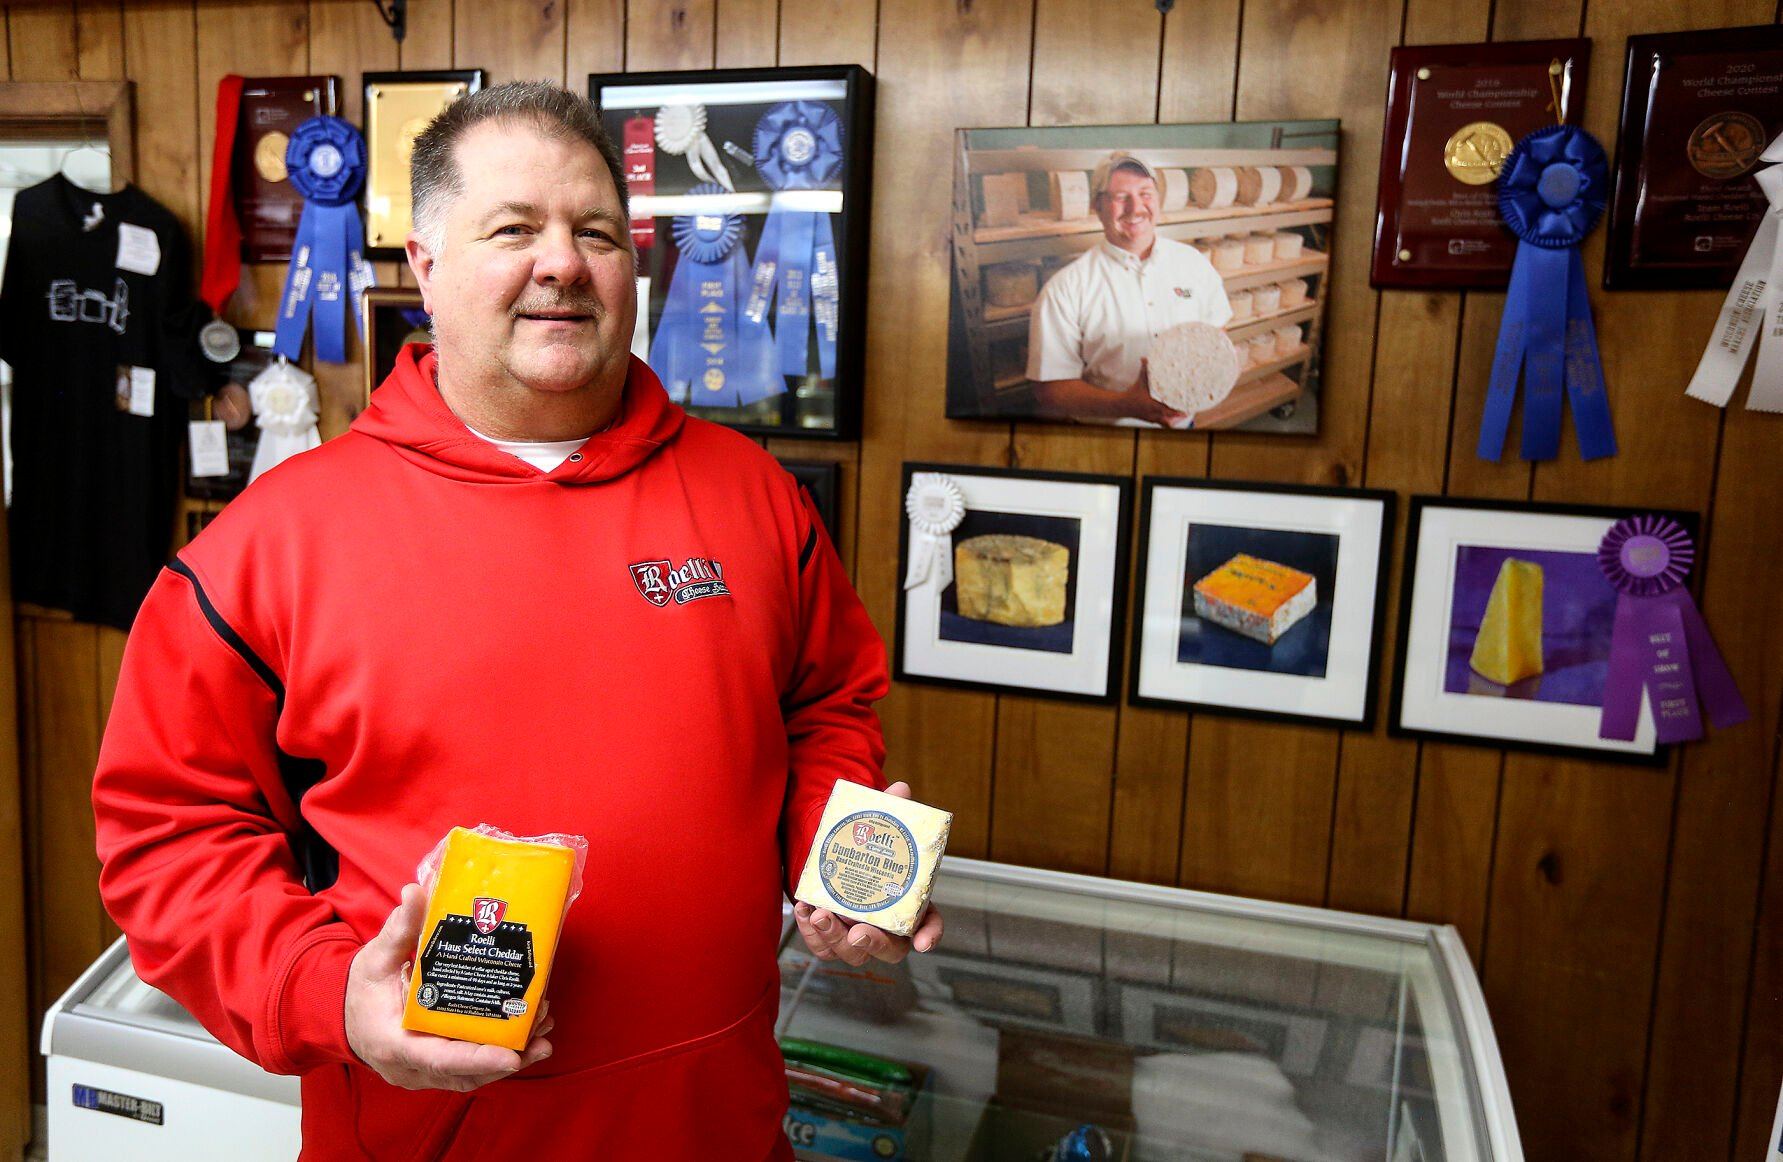 Cheese Master Chris Roelli, who operates Roelli Cheese Haus in Shullsburg, Wis., shows off his award-winning cheeses.    PHOTO CREDIT: Dave Kettering
Telegraph Herald